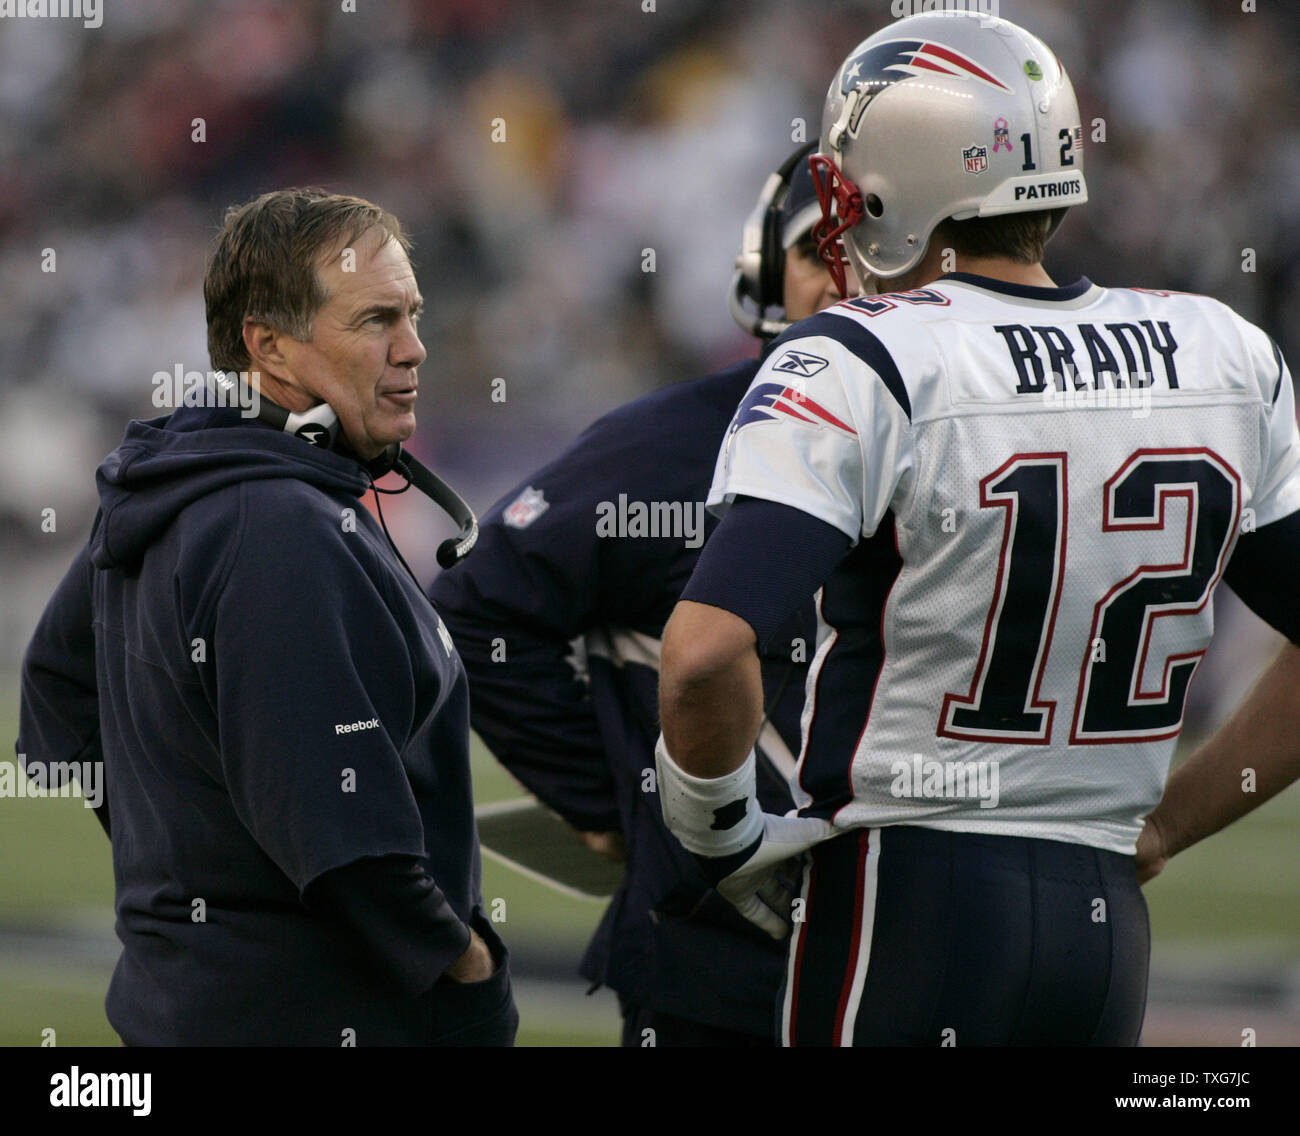 New England Patriots head coach Bill Belichick (L) chats with quarterback Tom Brady in the second quarter against the Dallas Cowboys at Gillette Stadium in Foxboro, Massachusetts on October 16, 2011.    UPI/Matthew Healey Stock Photo